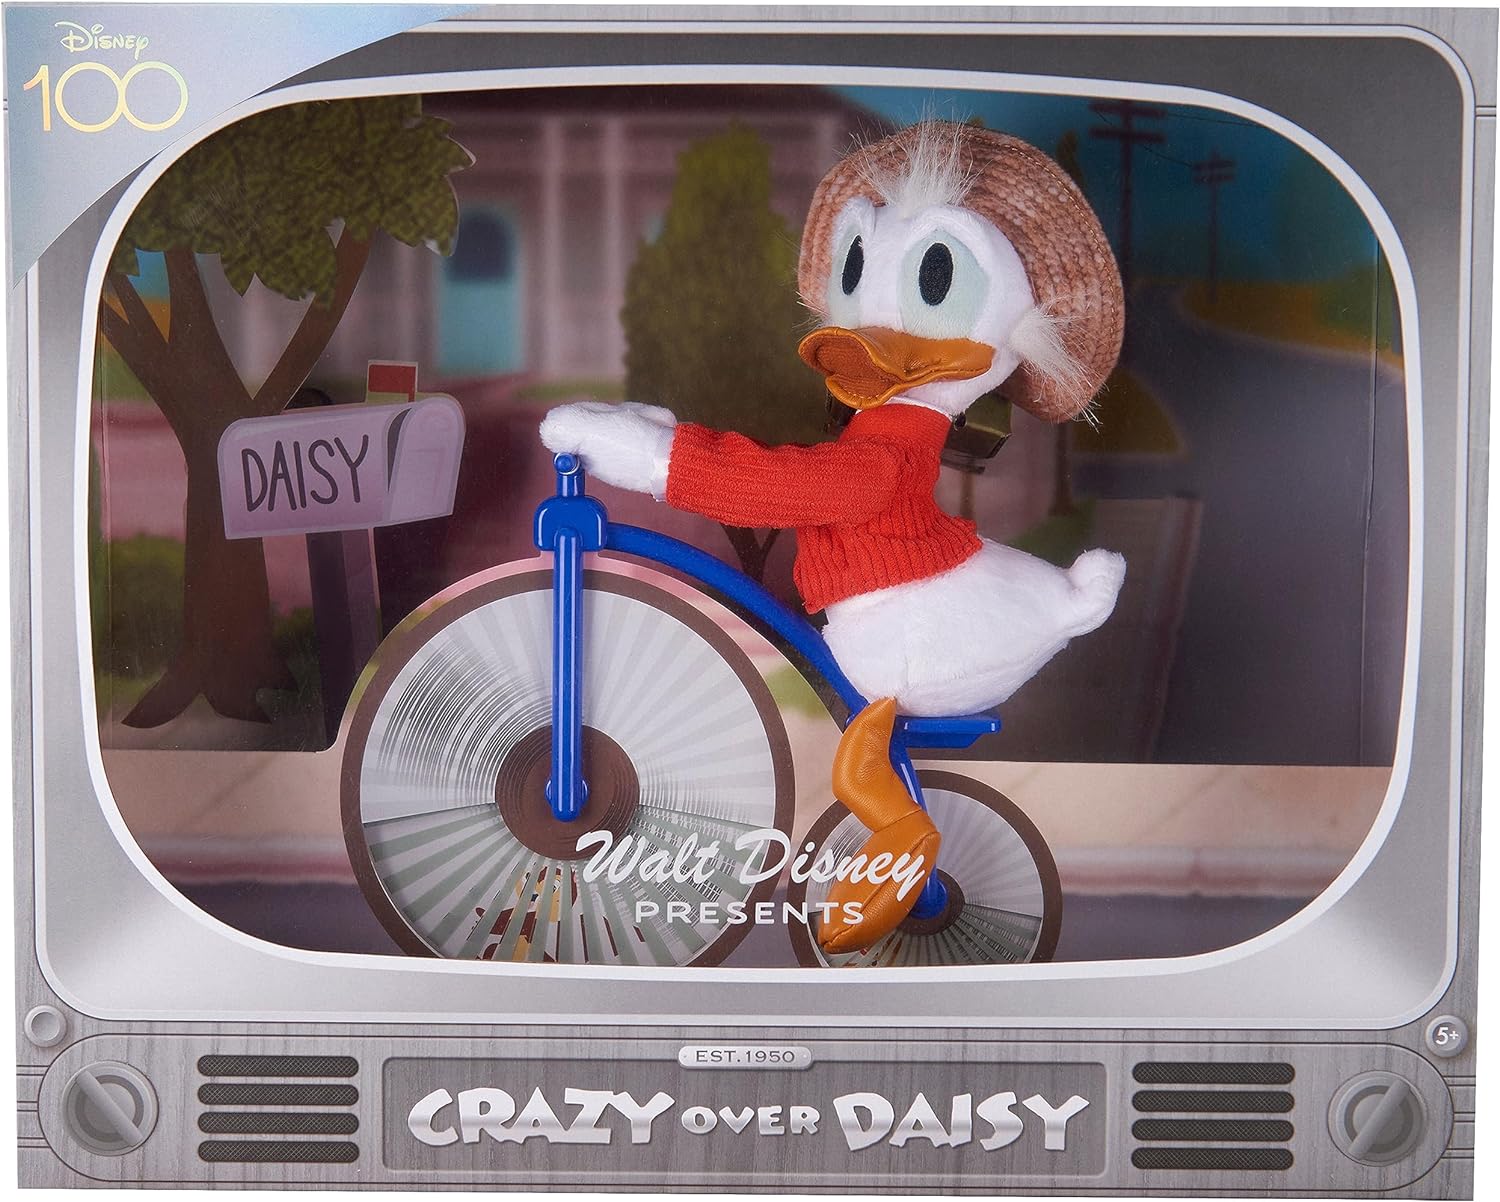 Prime Members: Disney 100 Years of Wonder “Crazy Over Daisy” Donald Duck Collectible Plush Stuffed Animal $11.99 at Amazon